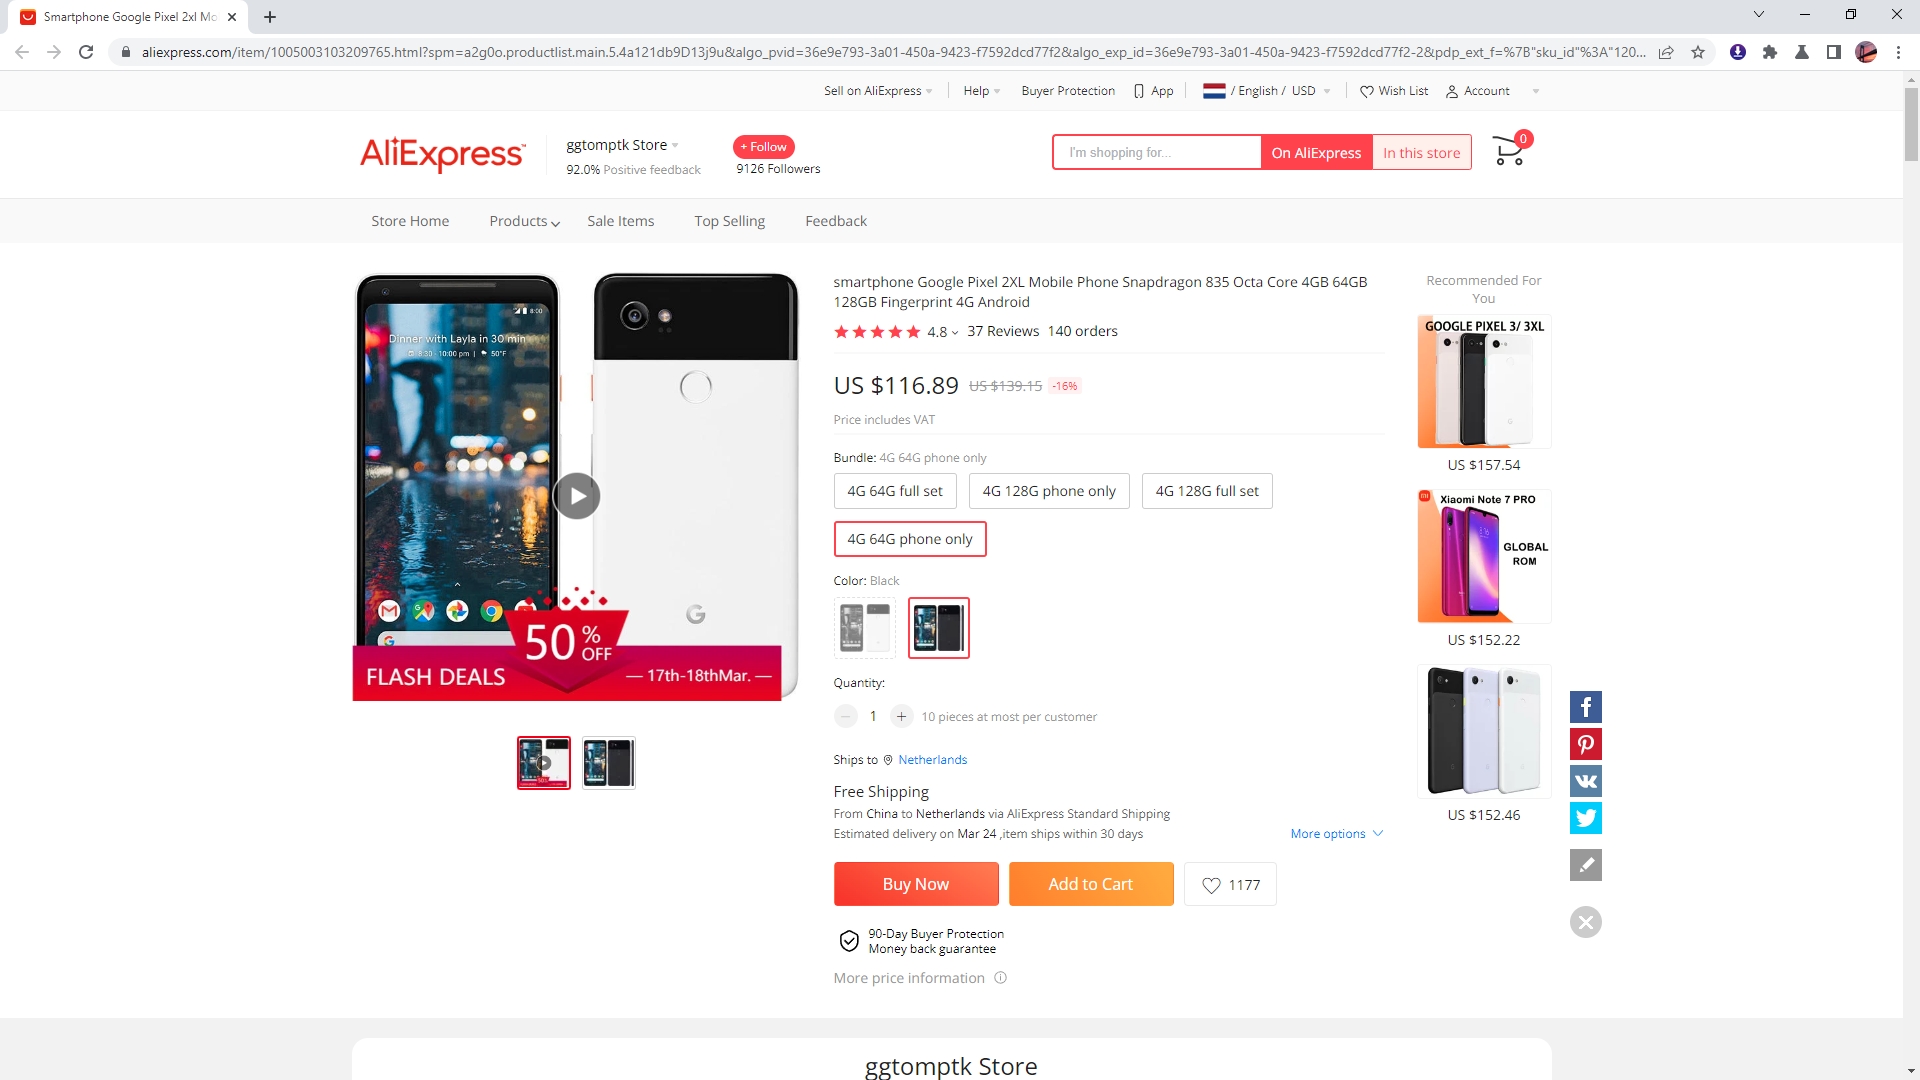 aliexpress product page - 3 Ways to Download AliExpress Product Images 23